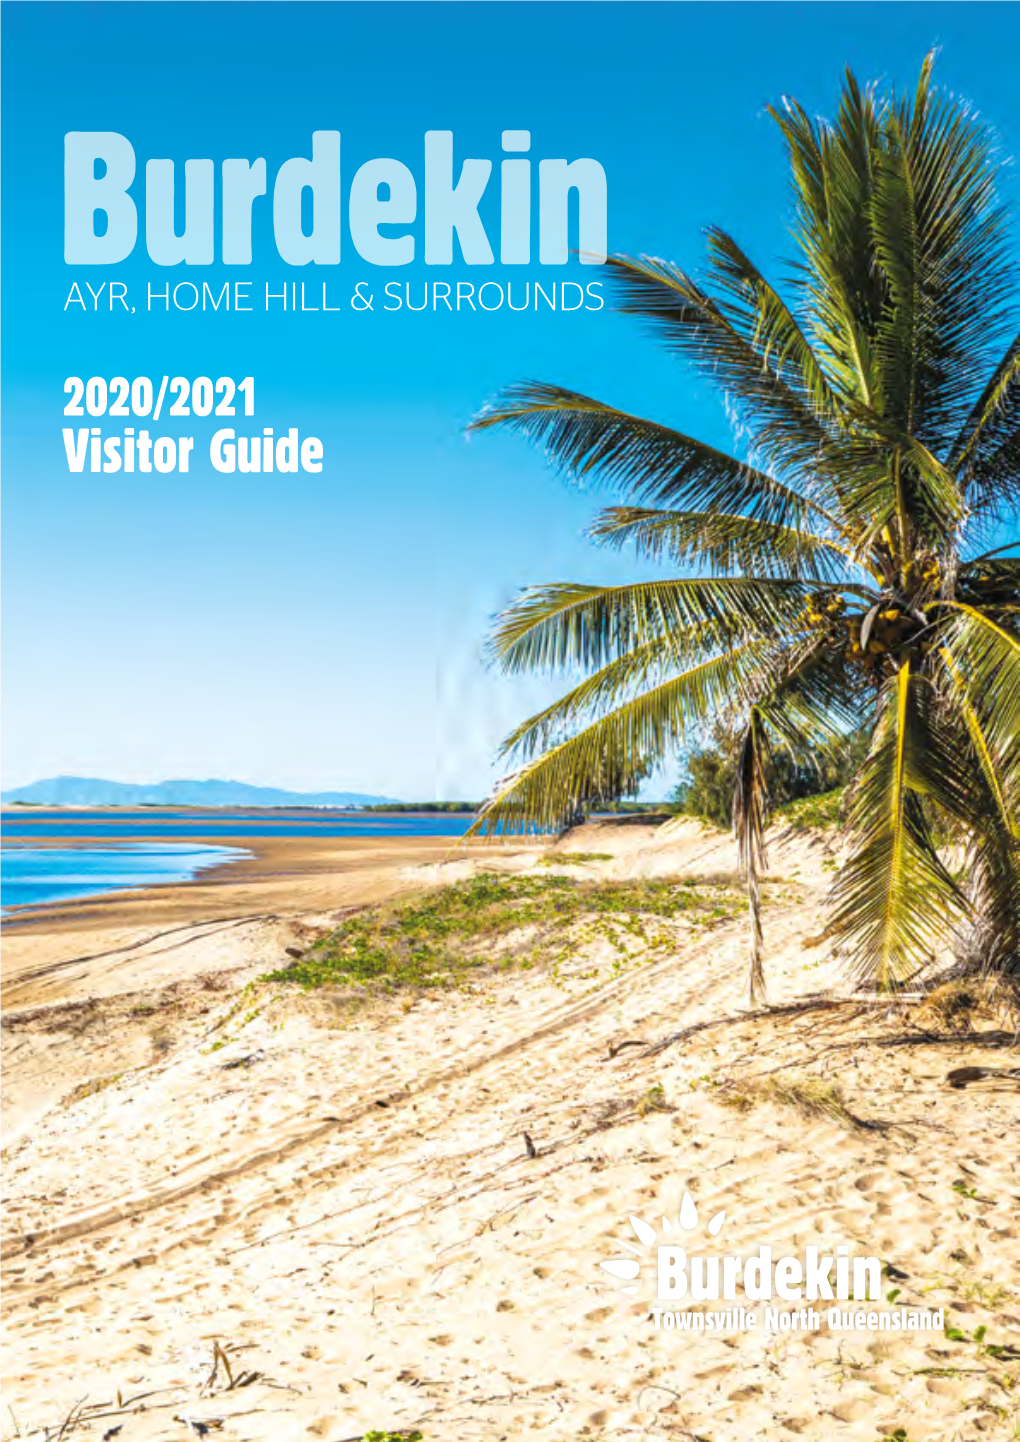 Our 2020/2021 Burdekin Visitor Guide If You Want to Have All the Info You